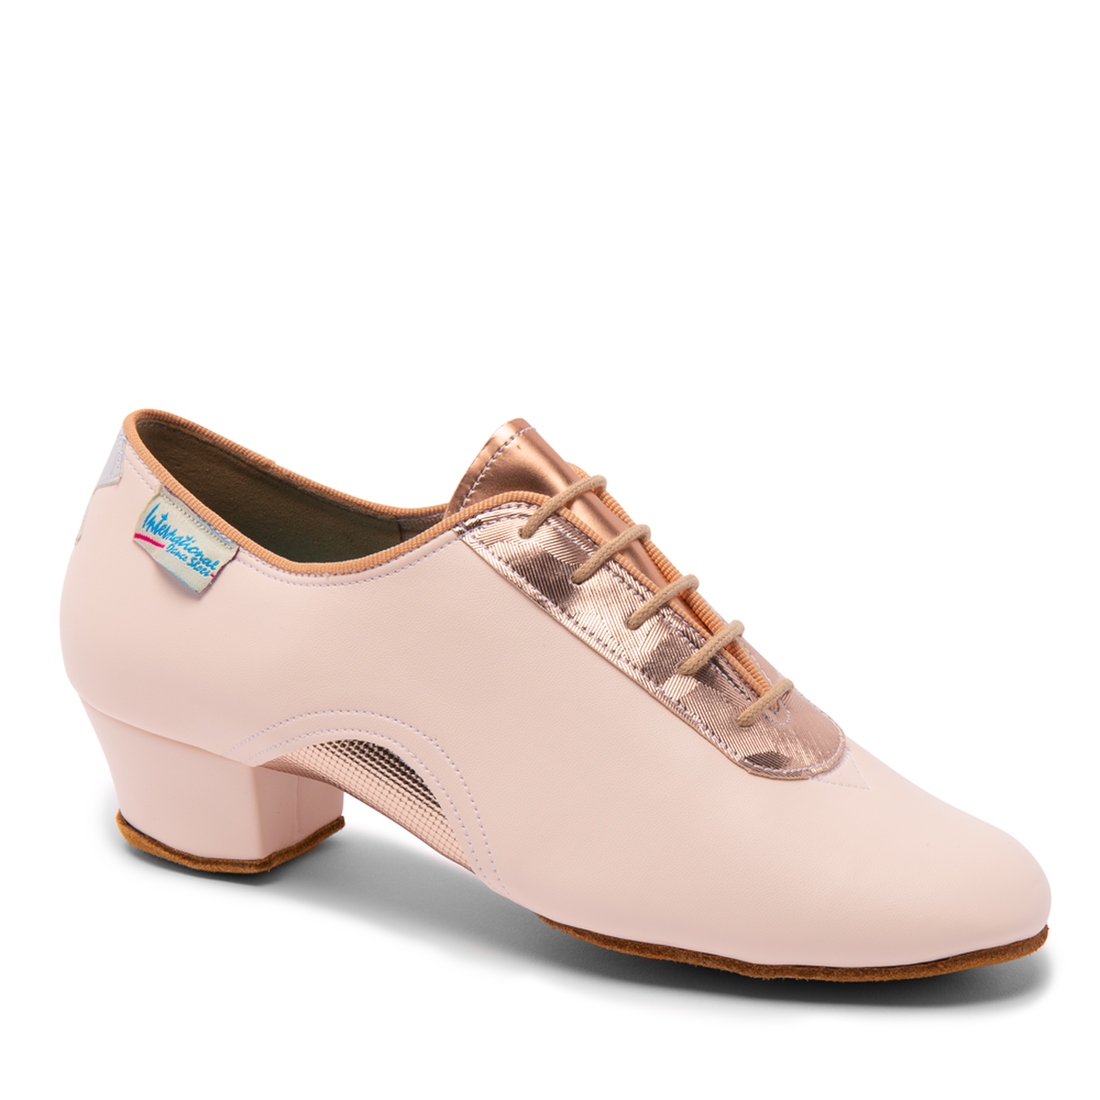 International Dance Shoes IDS Artiste SS Himalayan Rose Teaching and Practice Shoe with Metallic Rose Gold Accents in Stock